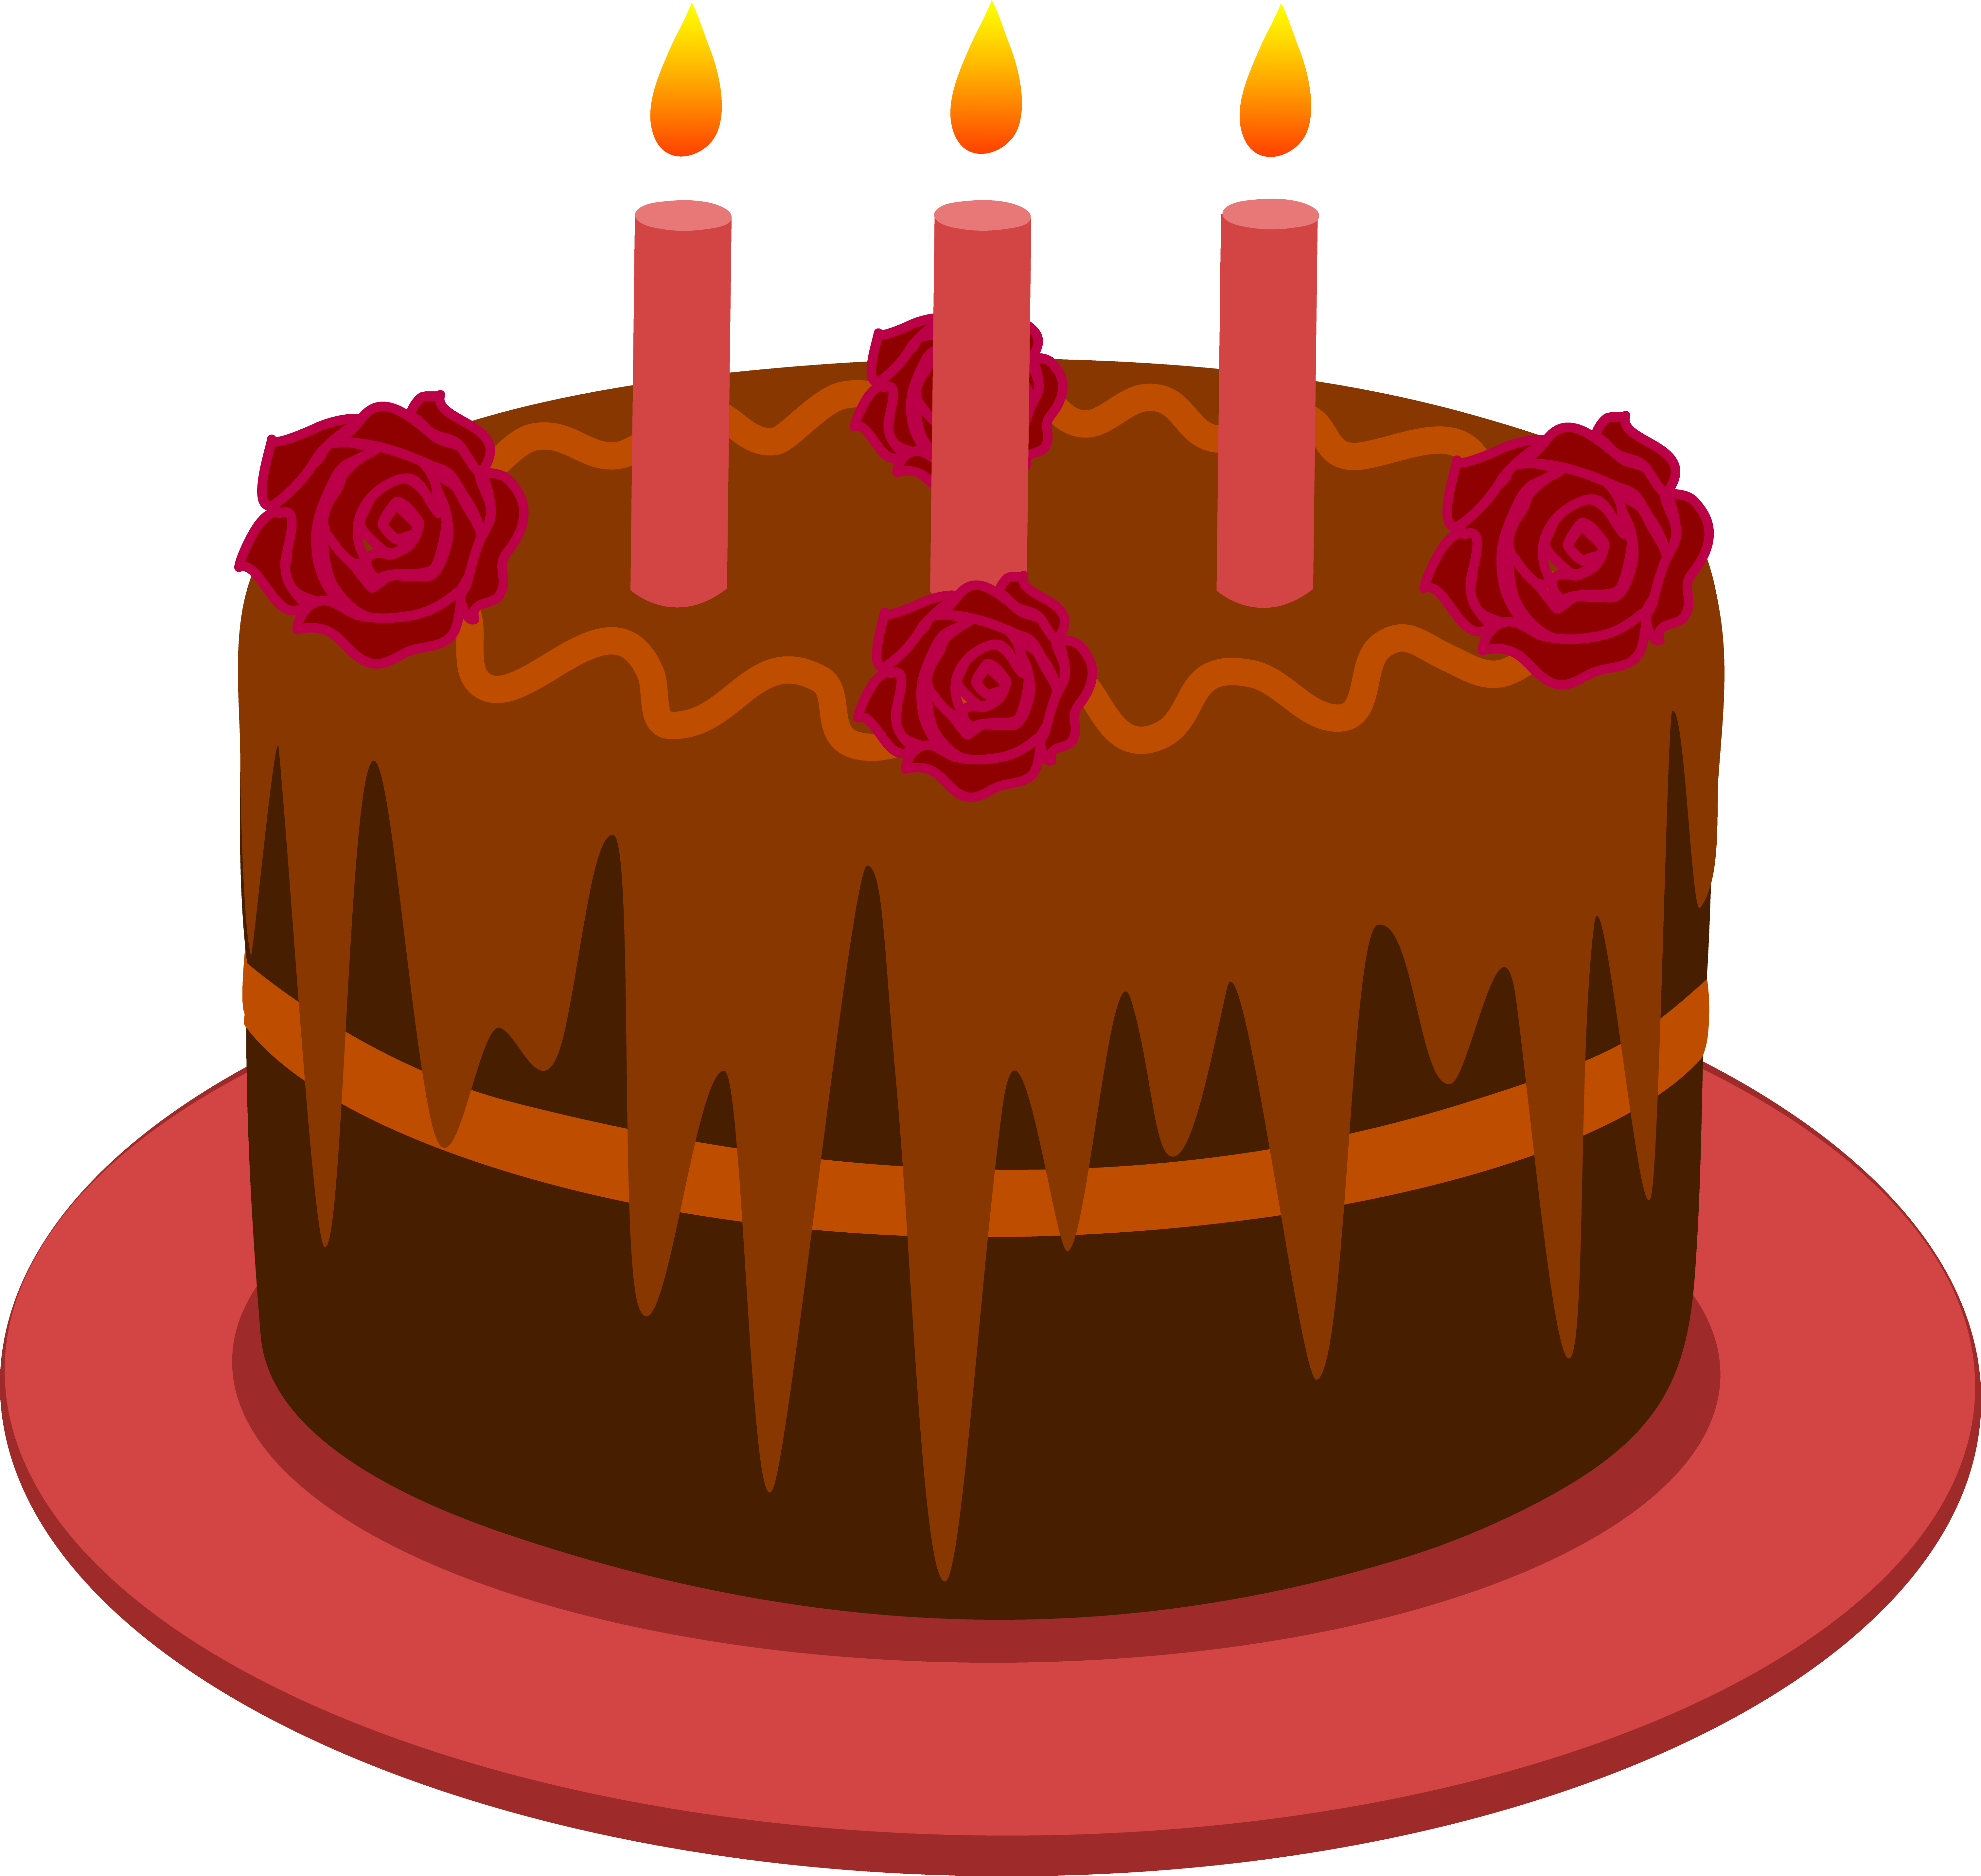 Candles clipart fancy. Chocolate birthday cake with